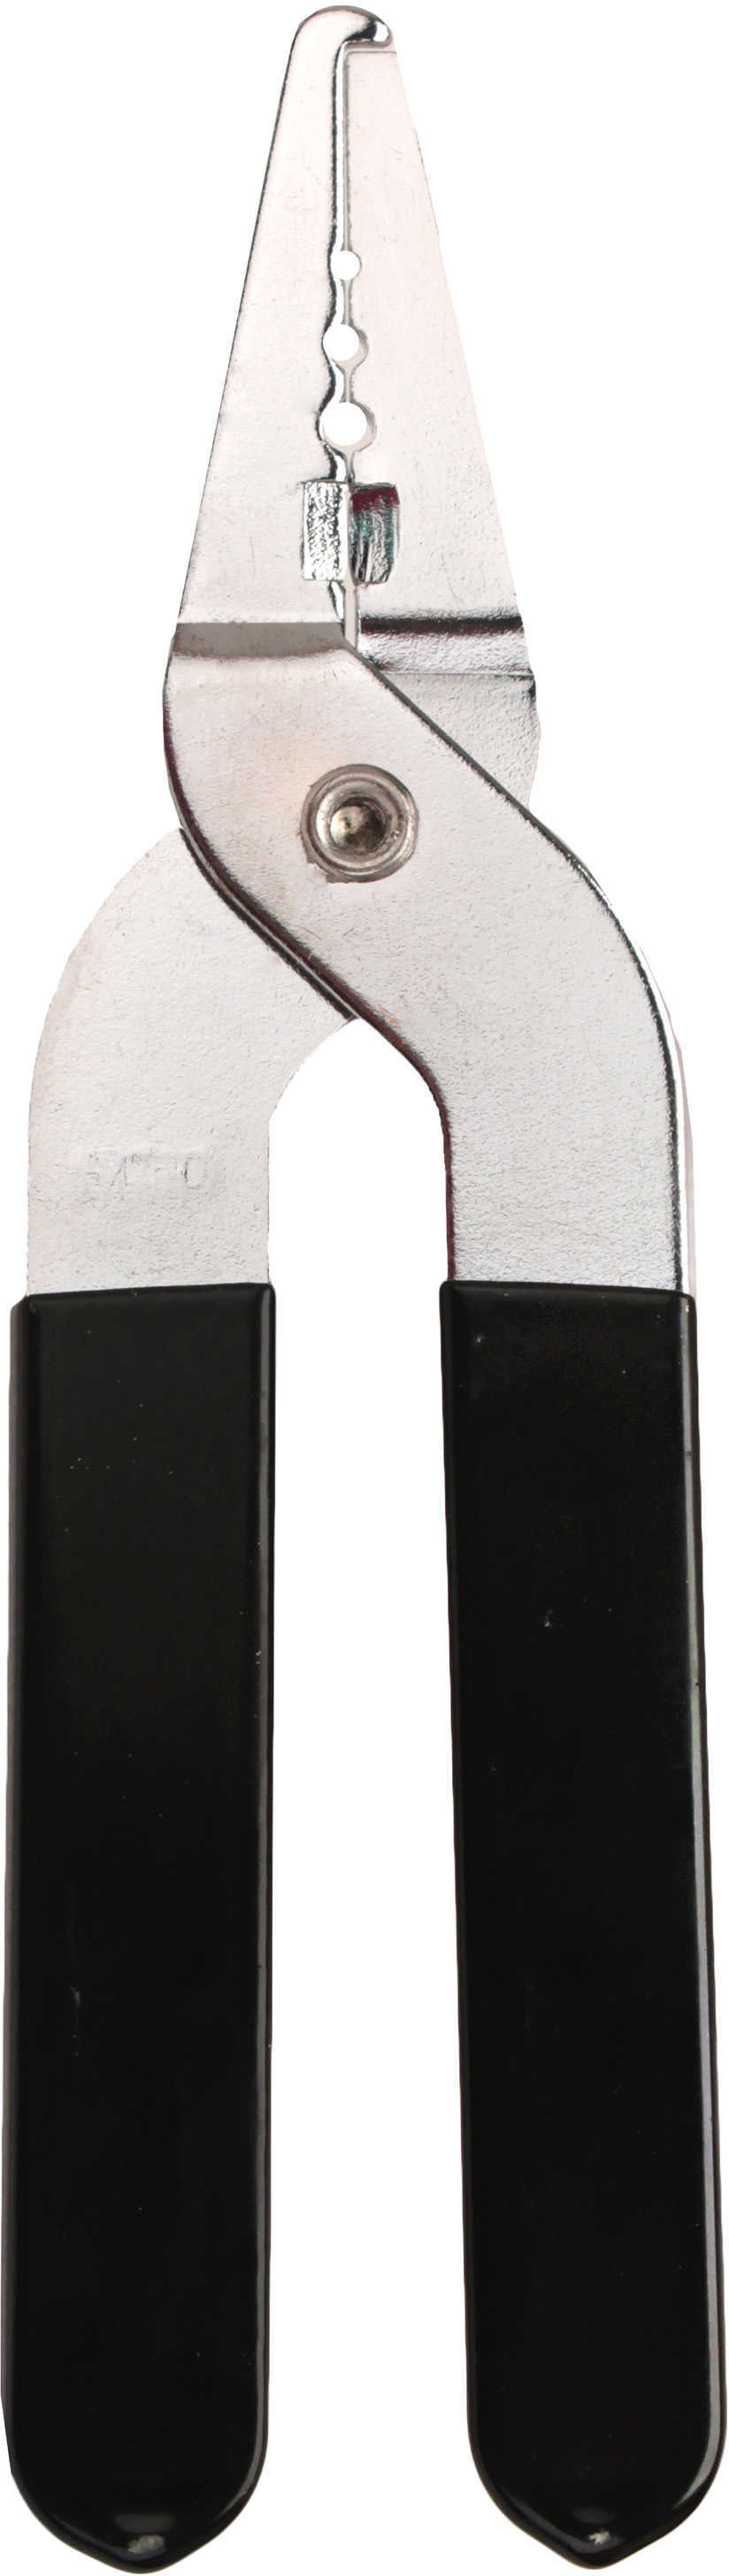 Eagle Claw Pliers Split Ring Long Nose Chrome Md#: 03020-006